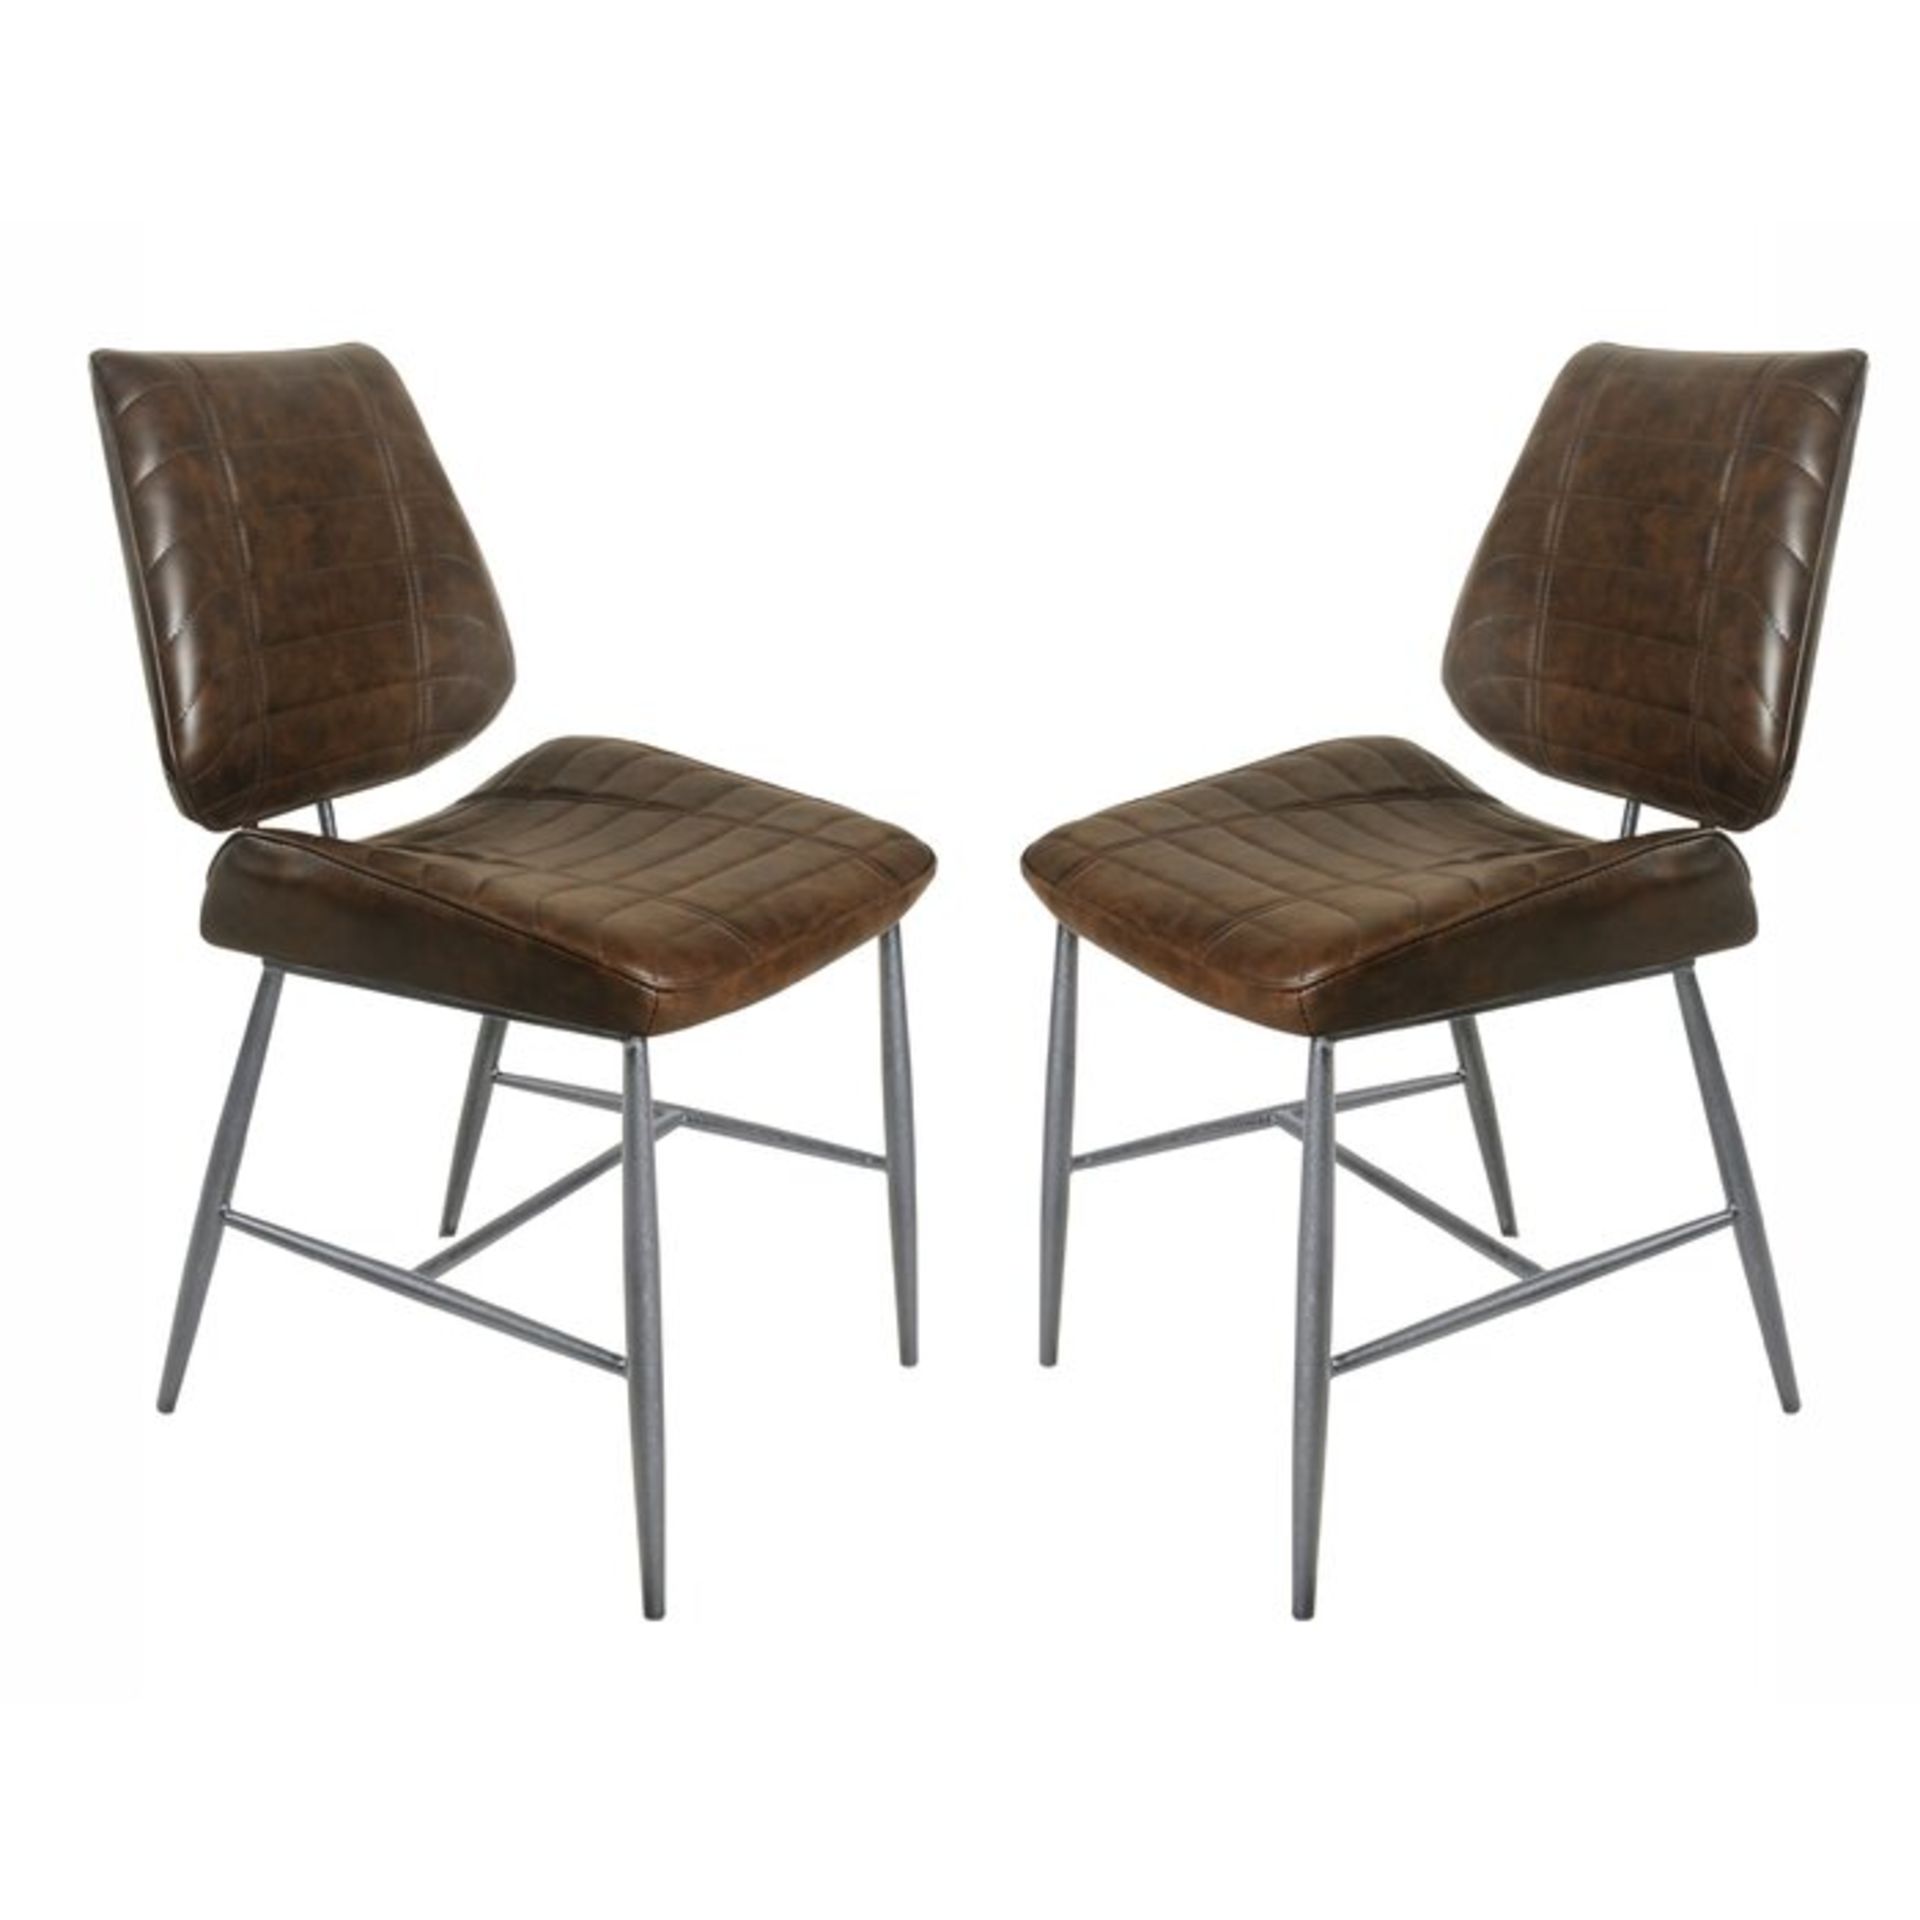 Tonkin Upholstered Dining Chair (Set of 2) - RRP £278.00 - Image 2 of 3